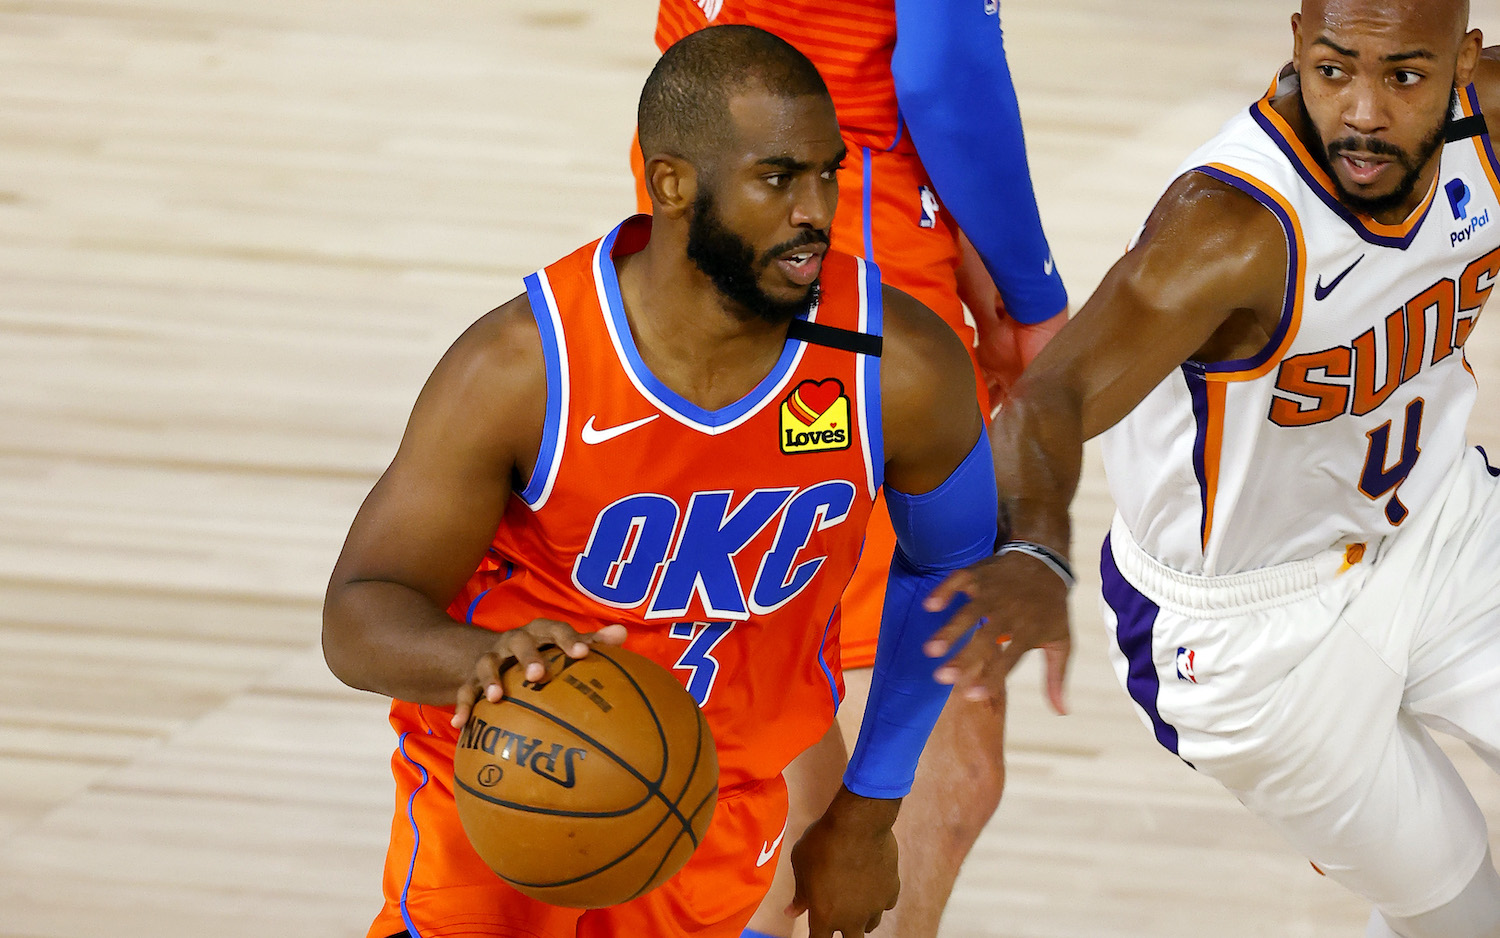 LAKE BUENA VISTA, FLORIDA - AUGUST 10: Chris Paul #3 of the Oklahoma City Thunder is pressured by Jevon Carter #4 of the Phoenix Suns during the second quarter at The Field House at ESPN Wide World Of Sports Complex on August 10, 2020 in Lake Buena Vista, Florida. NOTE TO USER: User expressly acknowledges and agrees that, by downloading and or using this photograph, User is consenting to the terms and conditions of the Getty Images License Agreement. (Photo by Mike Ehrmann/Getty Images)